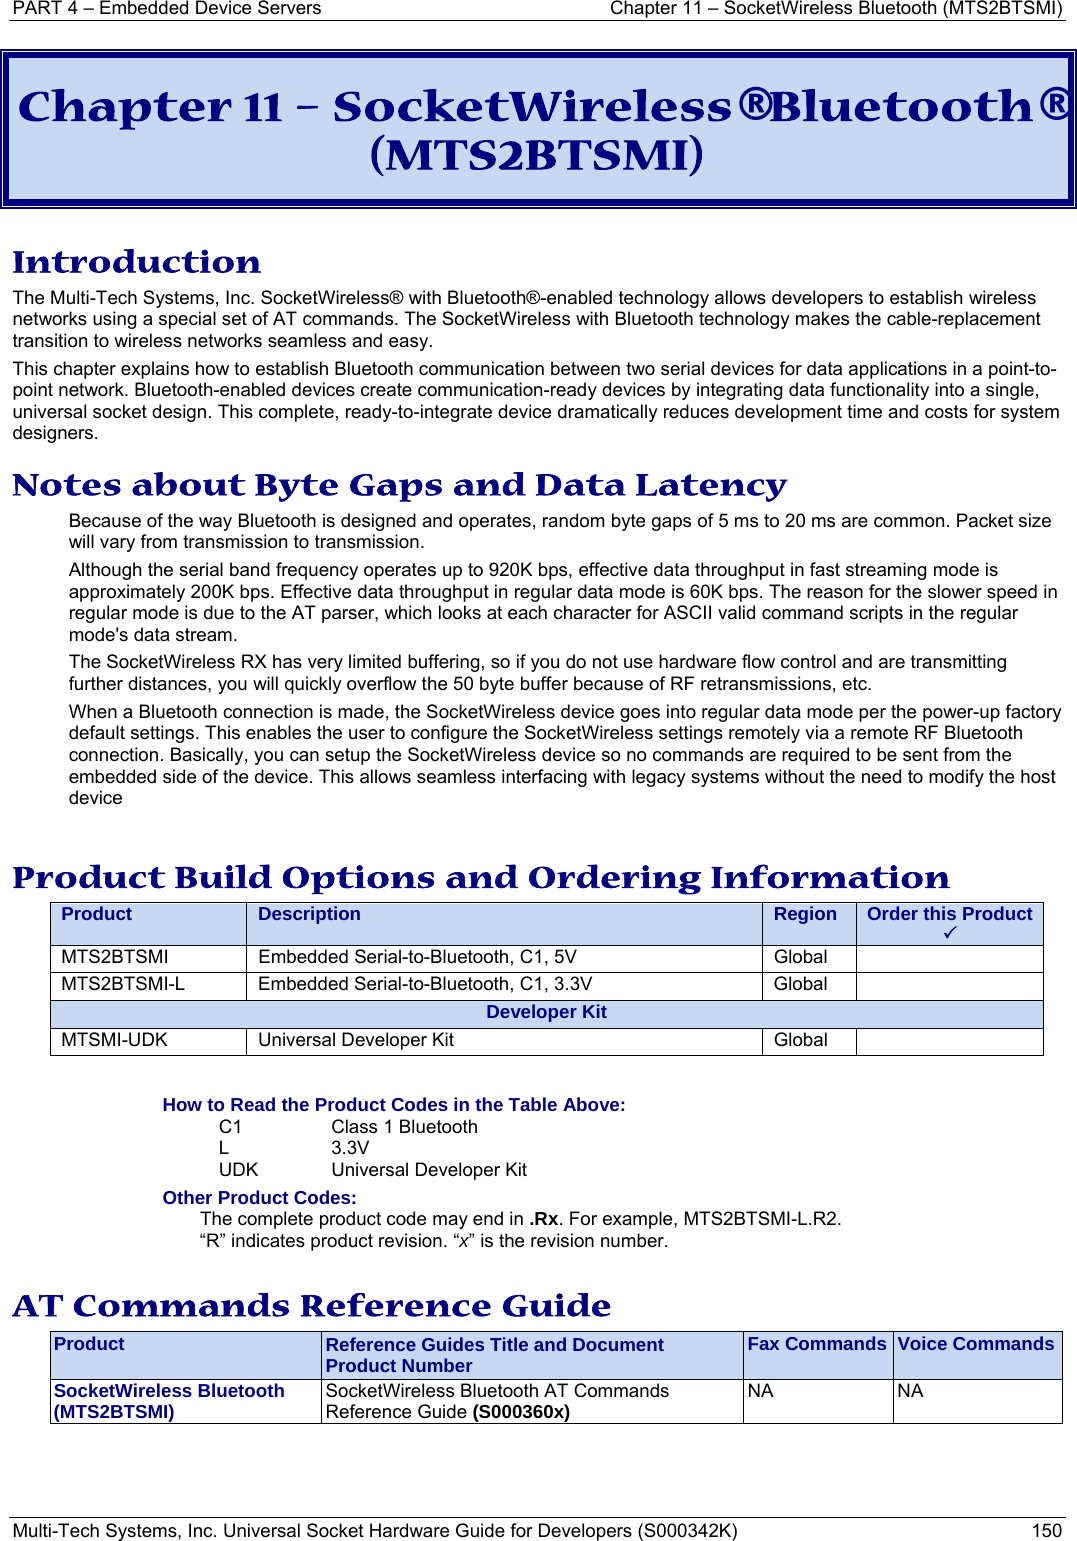 PART 4 – Embedded Device Servers  Chapter 11 – SocketWireless Bluetooth (MTS2BTSMI) Multi-Tech Systems, Inc. Universal Socket Hardware Guide for Developers (S000342K)  150  Chapter 11 – SocketWireless® Bluetooth® (MTS2BTSMI) Introduction The Multi-Tech Systems, Inc. SocketWireless® with Bluetooth®-enabled technology allows developers to establish wireless networks using a special set of AT commands. The SocketWireless with Bluetooth technology makes the cable-replacement transition to wireless networks seamless and easy.  This chapter explains how to establish Bluetooth communication between two serial devices for data applications in a point-to-point network. Bluetooth-enabled devices create communication-ready devices by integrating data functionality into a single, universal socket design. This complete, ready-to-integrate device dramatically reduces development time and costs for system designers. Notes about Byte Gaps and Data Latency Because of the way Bluetooth is designed and operates, random byte gaps of 5 ms to 20 ms are common. Packet size will vary from transmission to transmission.  Although the serial band frequency operates up to 920K bps, effective data throughput in fast streaming mode is approximately 200K bps. Effective data throughput in regular data mode is 60K bps. The reason for the slower speed in regular mode is due to the AT parser, which looks at each character for ASCII valid command scripts in the regular mode&apos;s data stream.  The SocketWireless RX has very limited buffering, so if you do not use hardware flow control and are transmitting further distances, you will quickly overflow the 50 byte buffer because of RF retransmissions, etc.   When a Bluetooth connection is made, the SocketWireless device goes into regular data mode per the power-up factory default settings. This enables the user to configure the SocketWireless settings remotely via a remote RF Bluetooth connection. Basically, you can setup the SocketWireless device so no commands are required to be sent from the embedded side of the device. This allows seamless interfacing with legacy systems without the need to modify the host device  Product Build Options and Ordering Information Product  Description  Region  Order this Product  3MTS2BTSMI  Embedded Serial-to-Bluetooth, C1, 5V  Global   MTS2BTSMI-L  Embedded Serial-to-Bluetooth, C1, 3.3V  Global   Developer KitMTSMI-UDK  Universal Developer Kit  Global    How to Read the Product Codes in the Table Above: C1  Class 1 Bluetooth  L 3.3V UDK  Universal Developer Kit Other Product Codes: The complete product code may end in .Rx. For example, MTS2BTSMI-L.R2.   “R” indicates product revision. “x” is the revision number.  AT Commands Reference Guide Product  Reference Guides Title and Document Product Number  Fax Commands  Voice CommandsSocketWireless Bluetooth   (MTS2BTSMI)  SocketWireless Bluetooth AT Commands Reference Guide (S000360x)   NA NA    